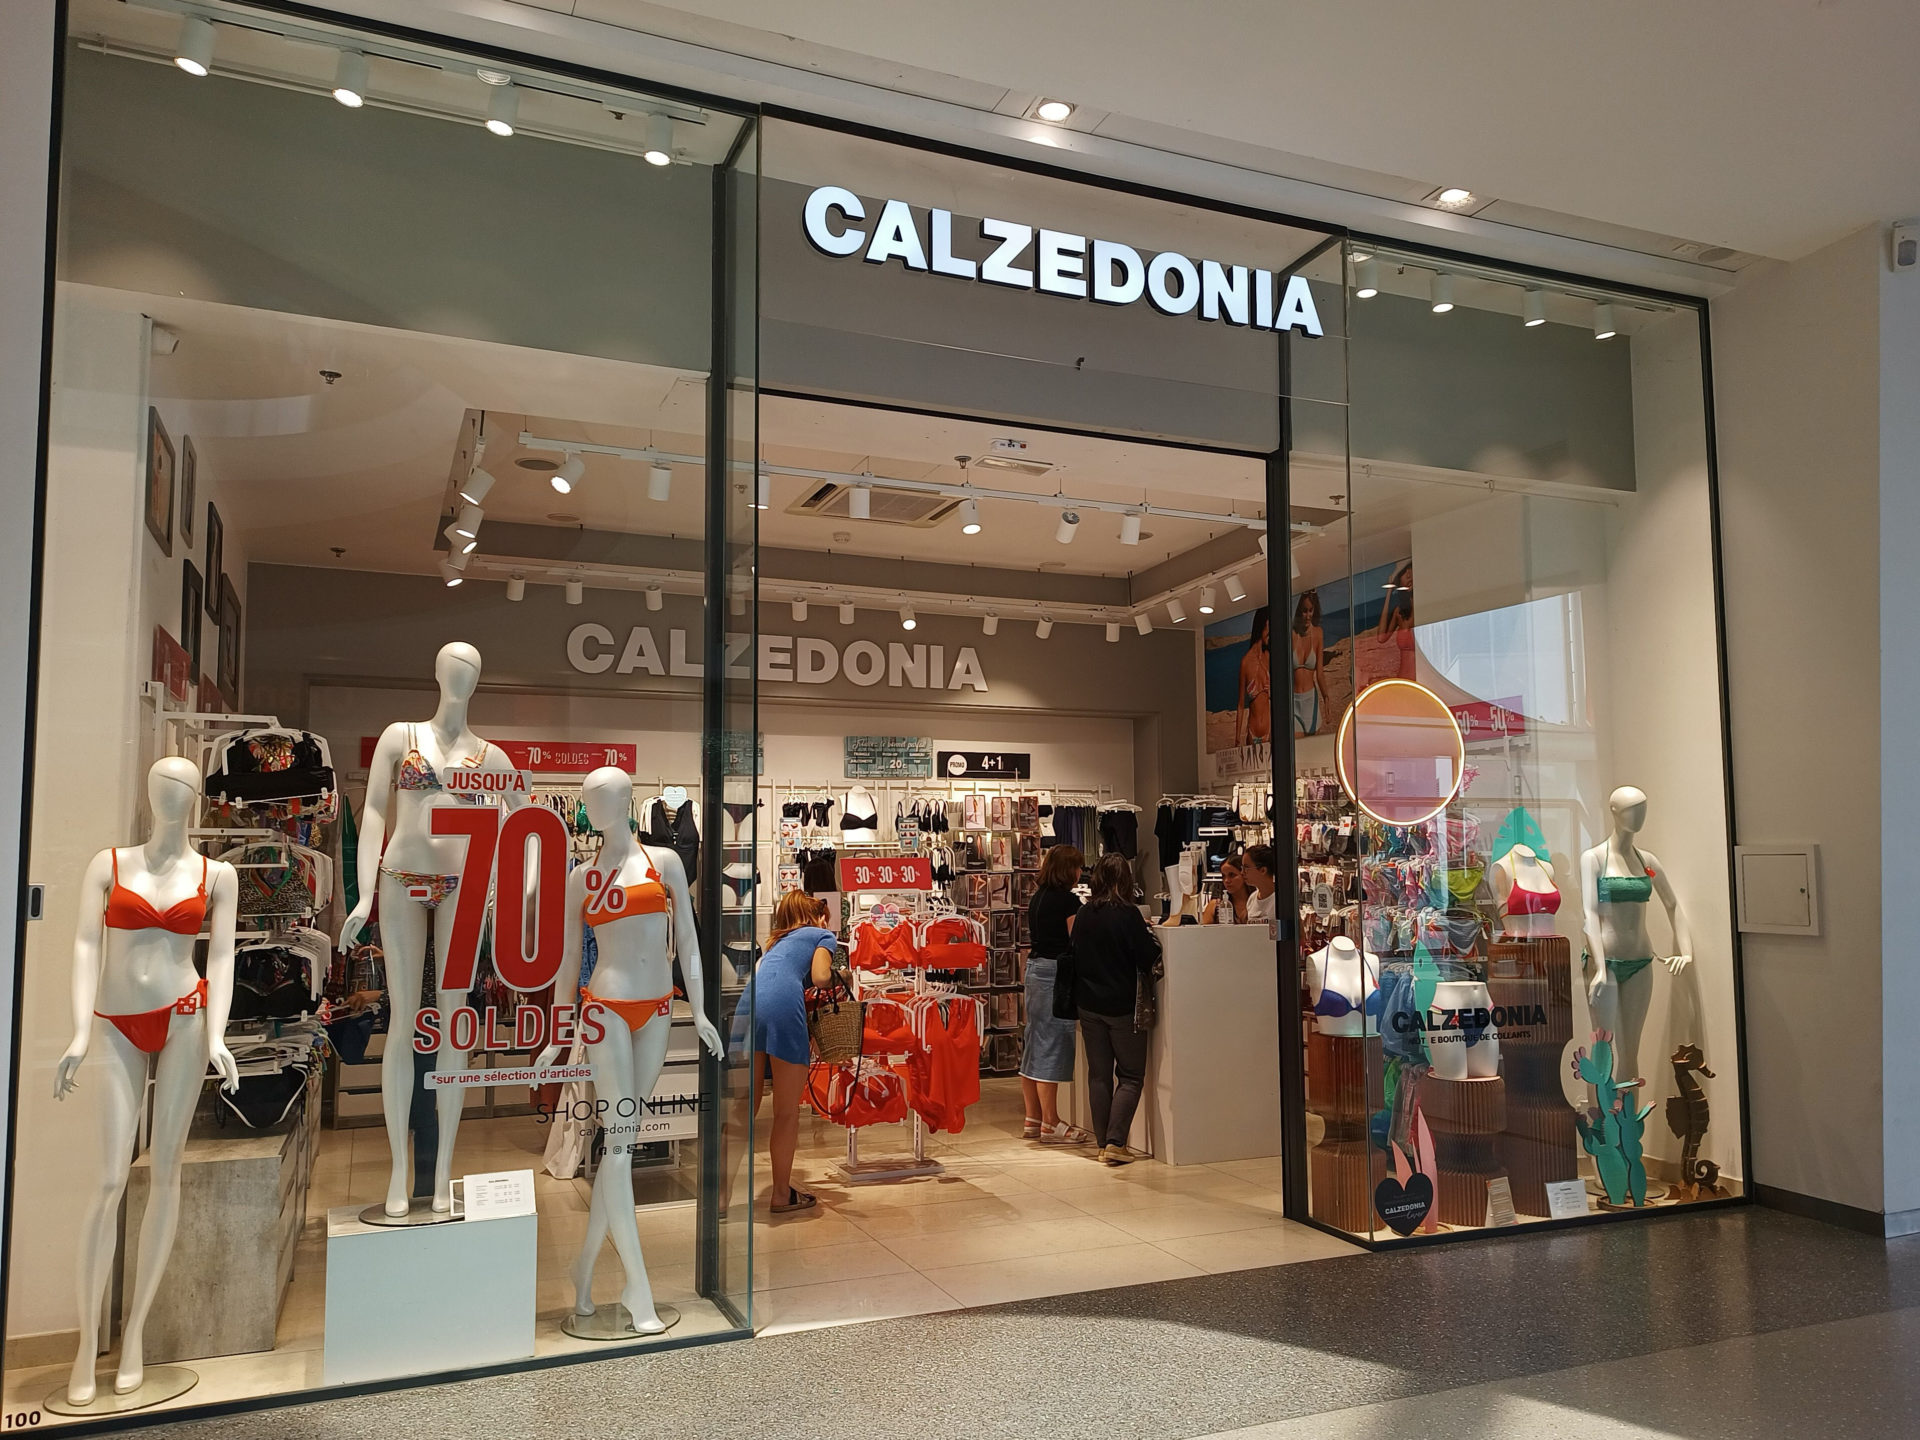 https://mediacite.be/wp-content/uploads/2022/07/Calzedonia_Mediacite-copy-scaled.jpg